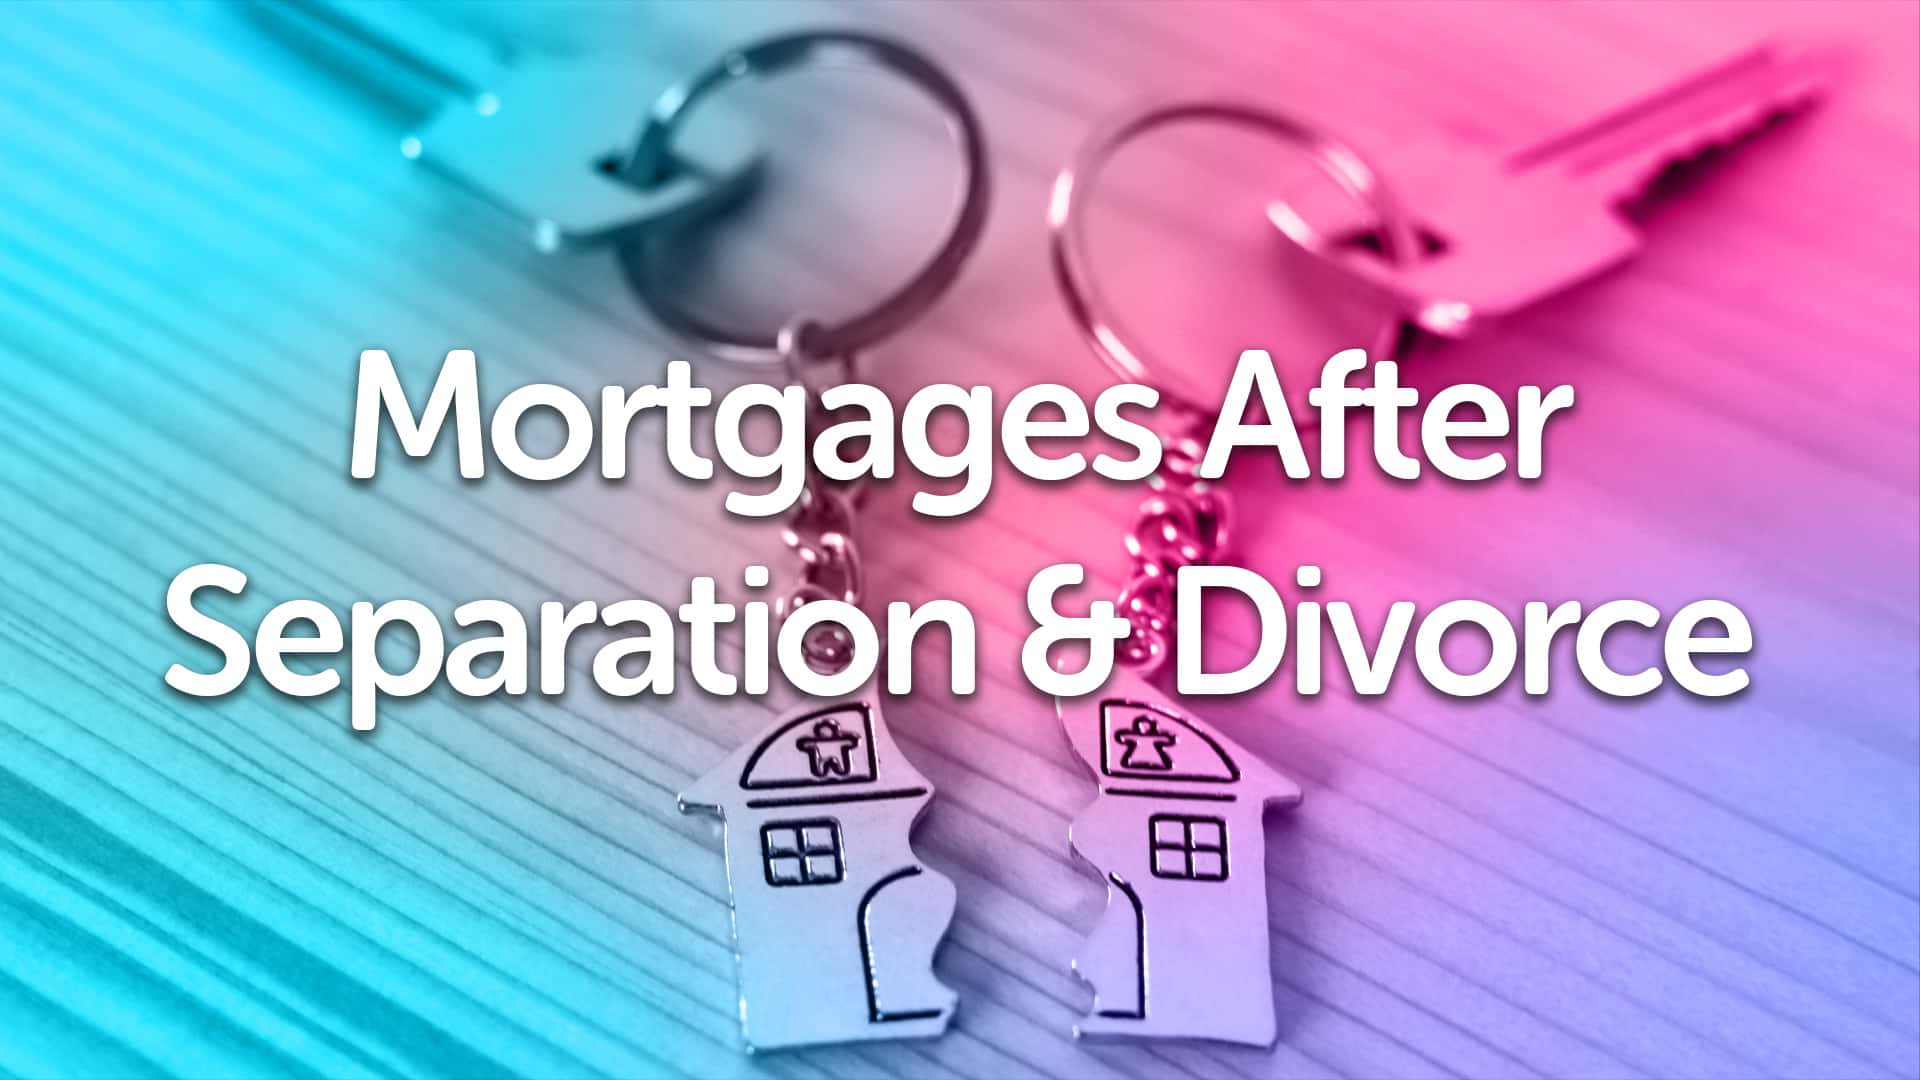 Divorce & Separation Mortgage Advice in Manchester